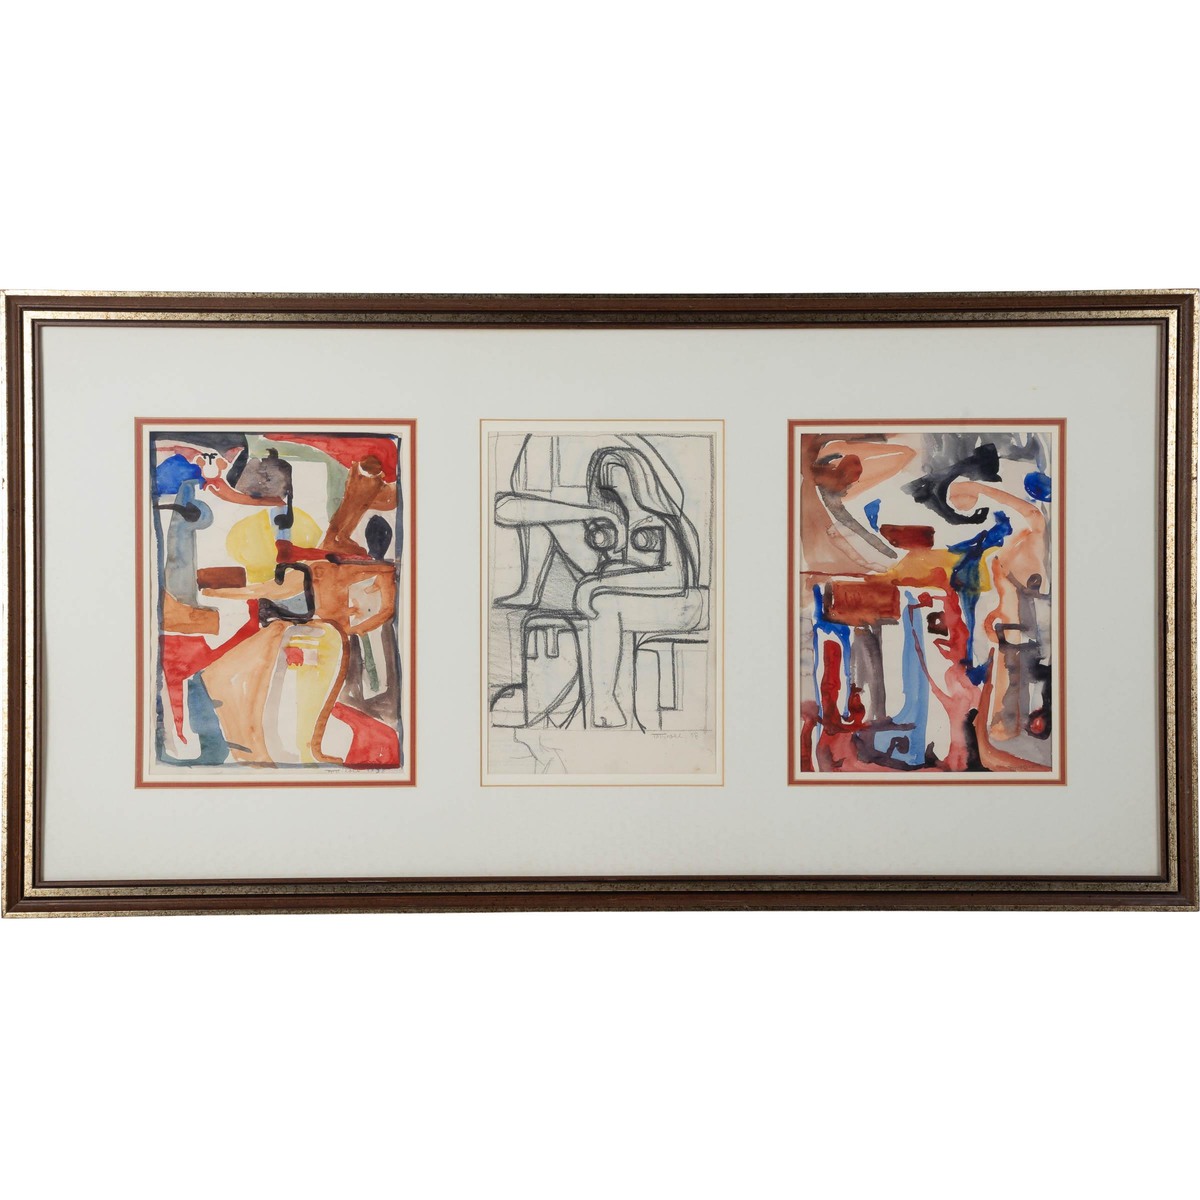 Marion Florence S. MacKay Nicoll (1909-1985), TRIPTYCH, 1958, sight 10.2 x 7.5 in — 26 x 19 cm; sigh - Image 2 of 3